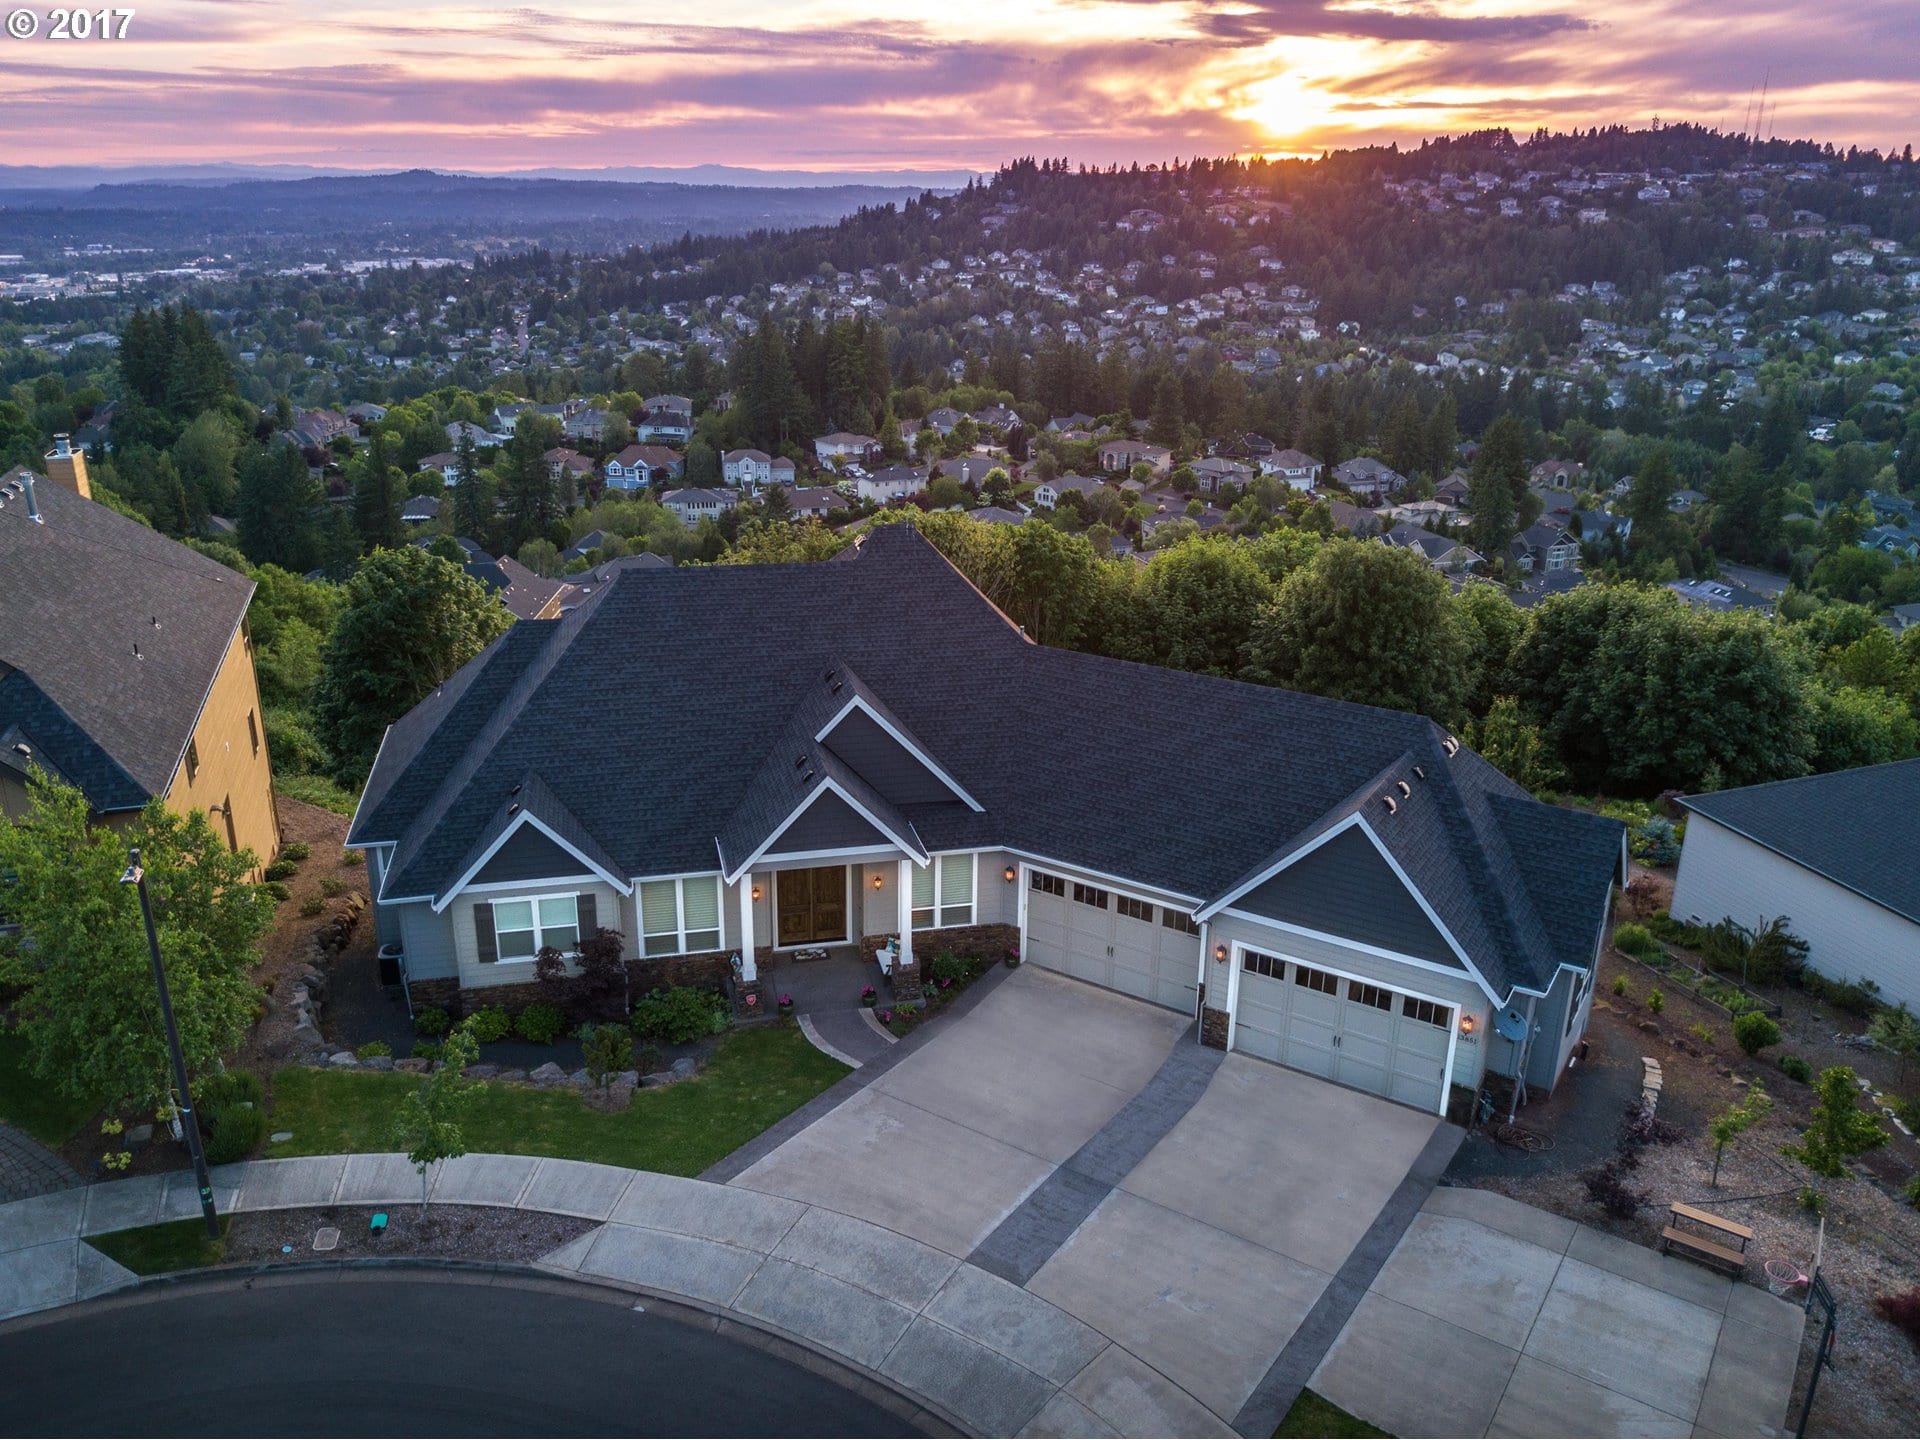 Luxury Homes at Sunset - Portland, OR - Terrie Cox, RE/MAX Equity Group